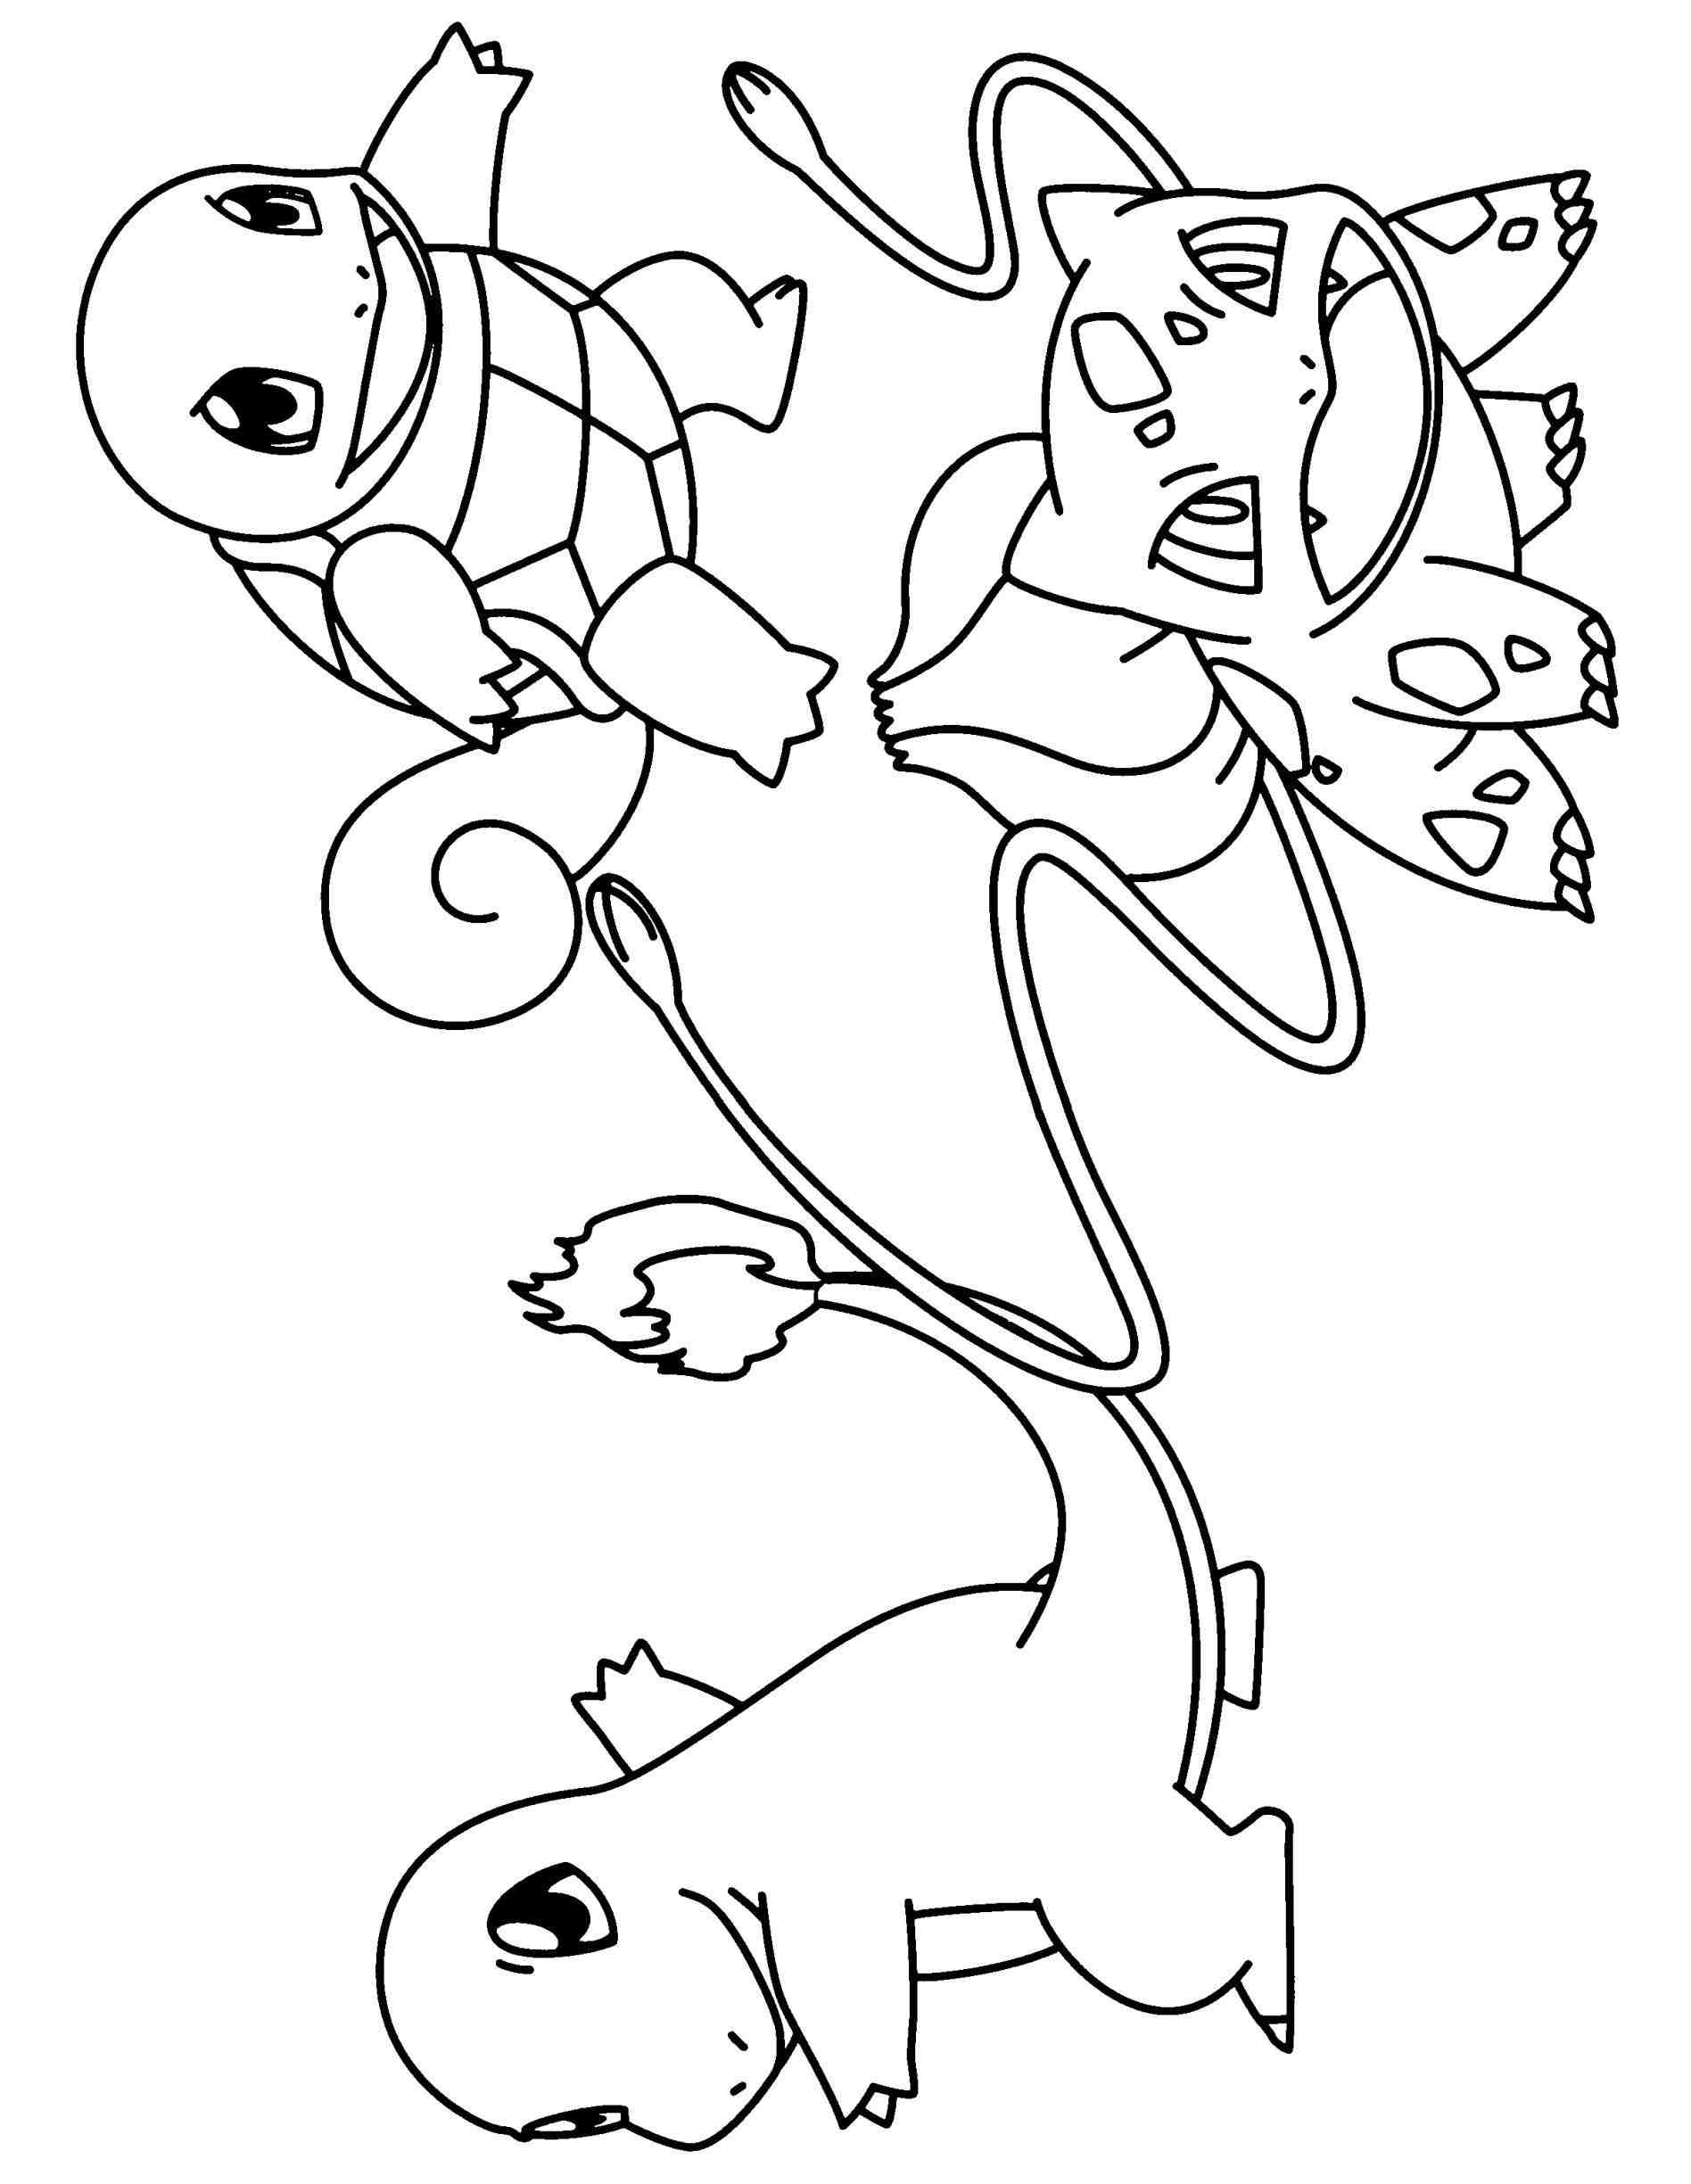 Pokemon Coloring Pages Wartortle at GetColorings.com | Free printable ...